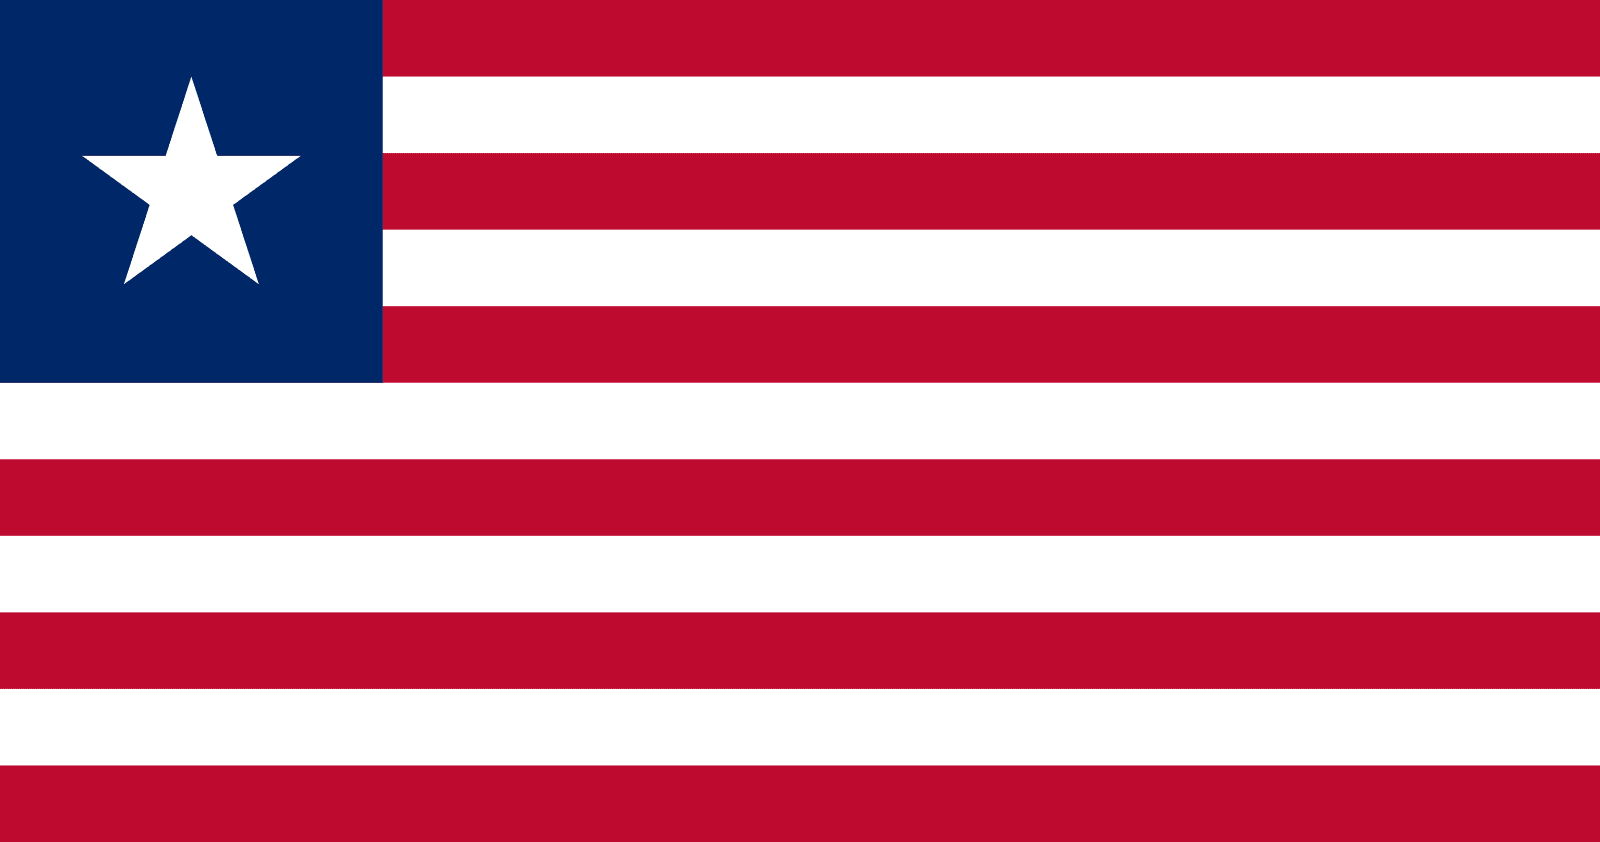 Facts about Liberia